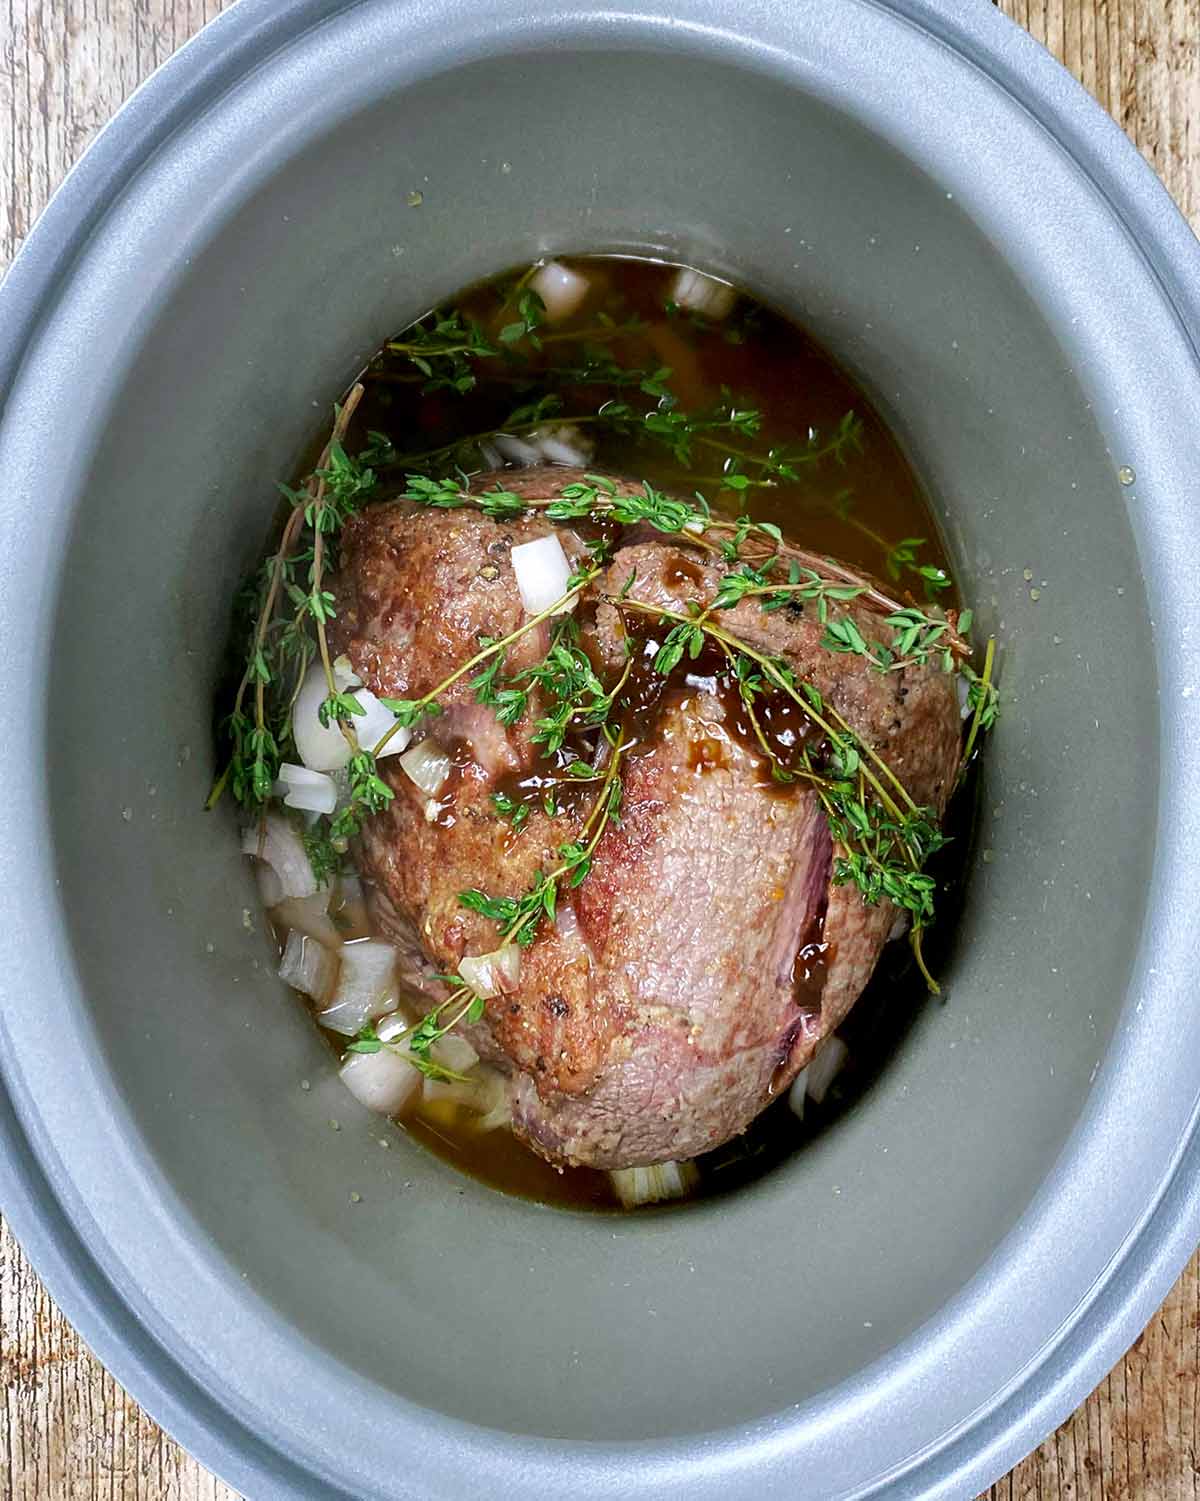 Browned beef joint in a slow cooker with thyme, shallots and stock.